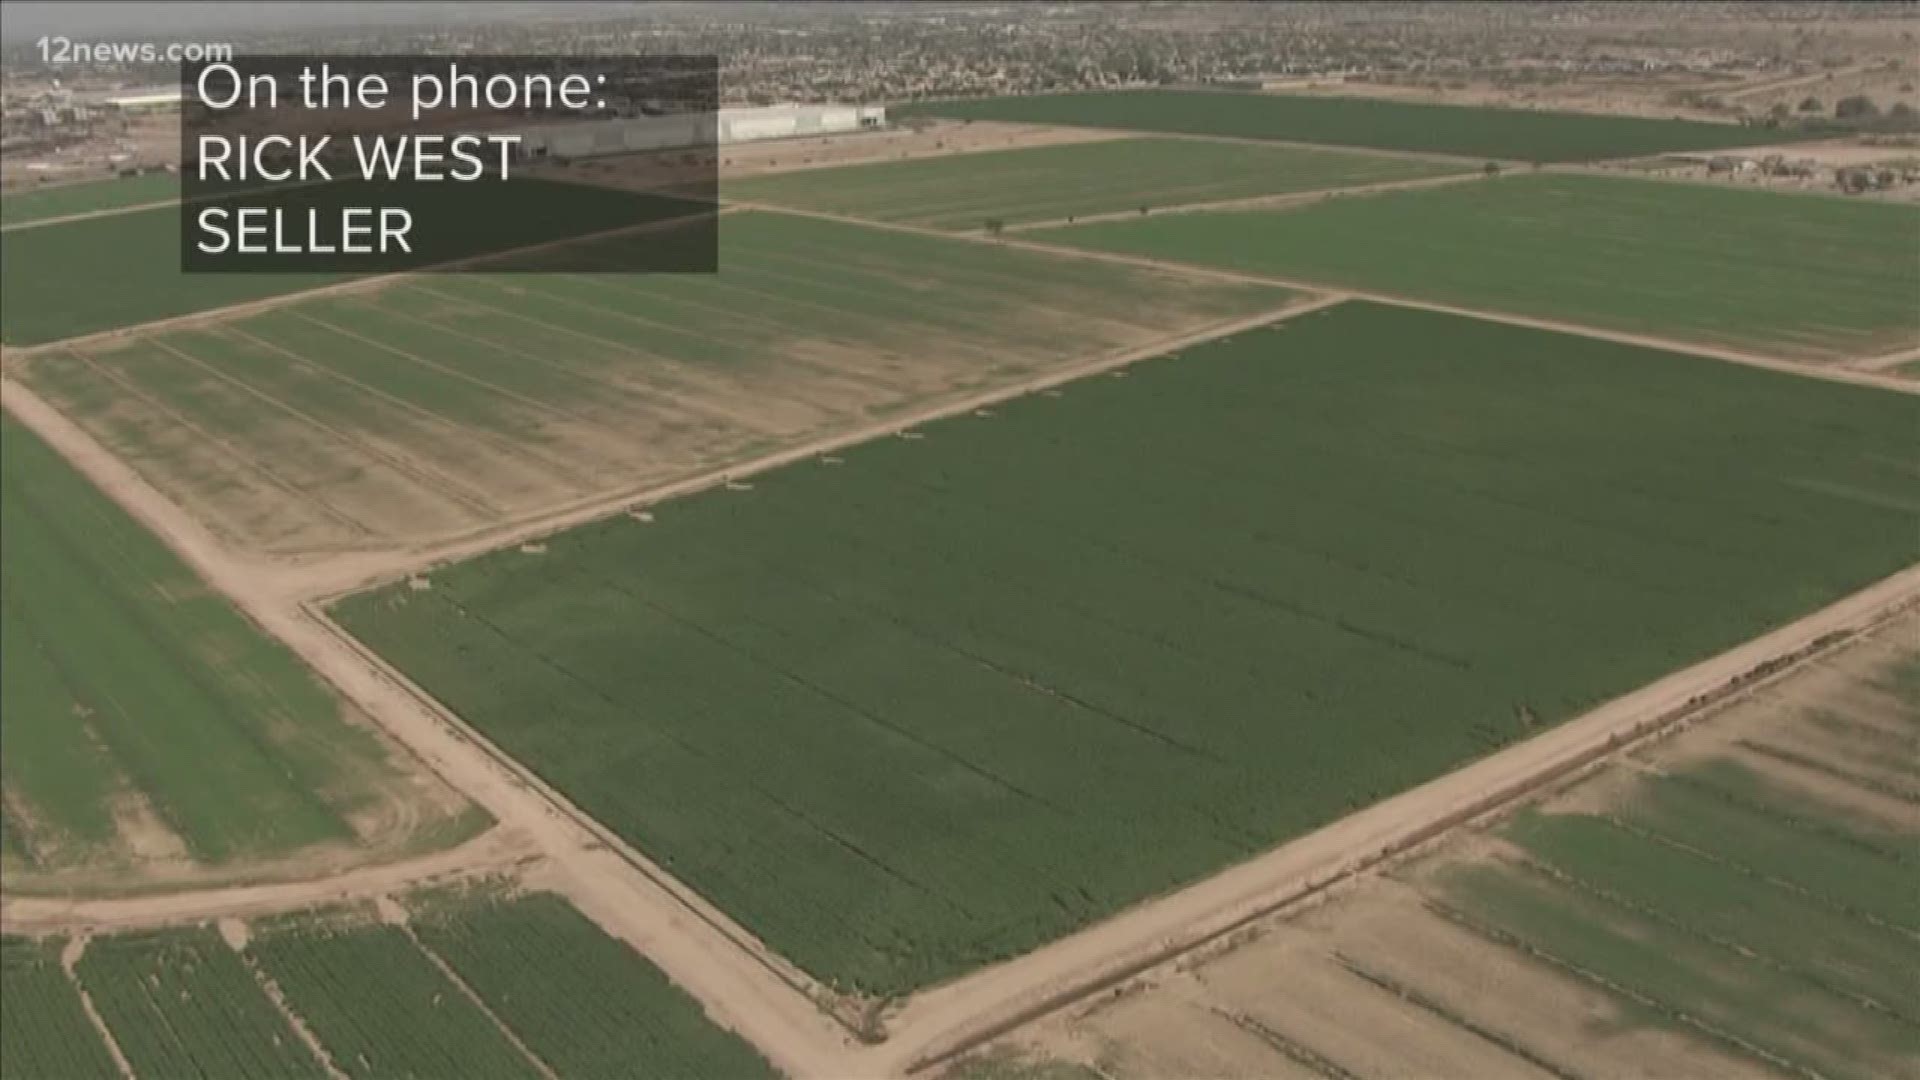 Microsoft has bought 258 acres of land in Goodyear. We speak to people  about how they feel about having the computer giant as their neighbor.